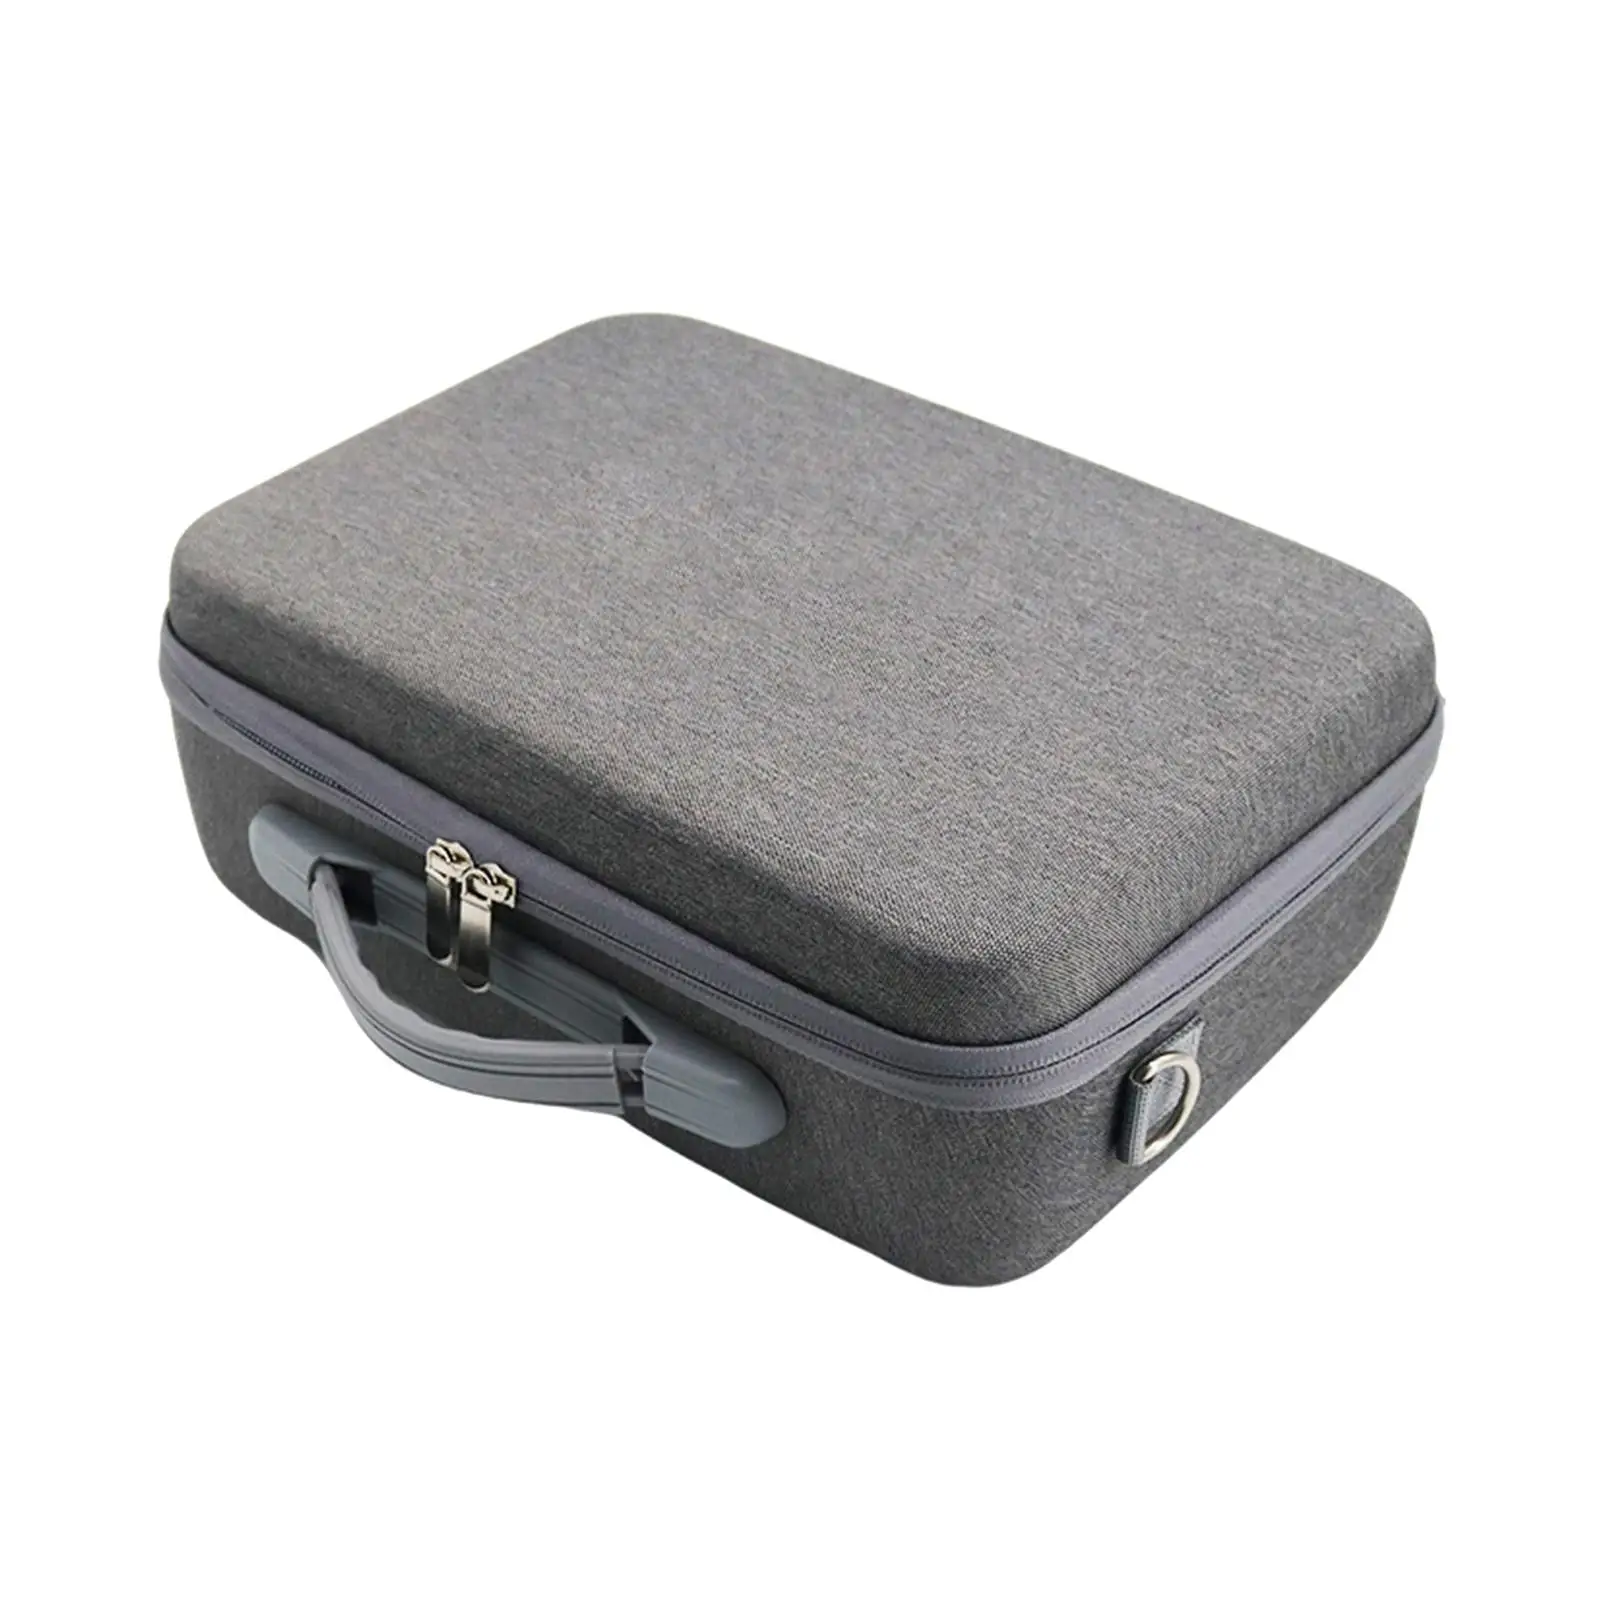 Carrying Case Travel Case with Detachable Shoulder Strap Waterproof Nylon Storage Shoulder Bag for RC Quadcopter Accessories